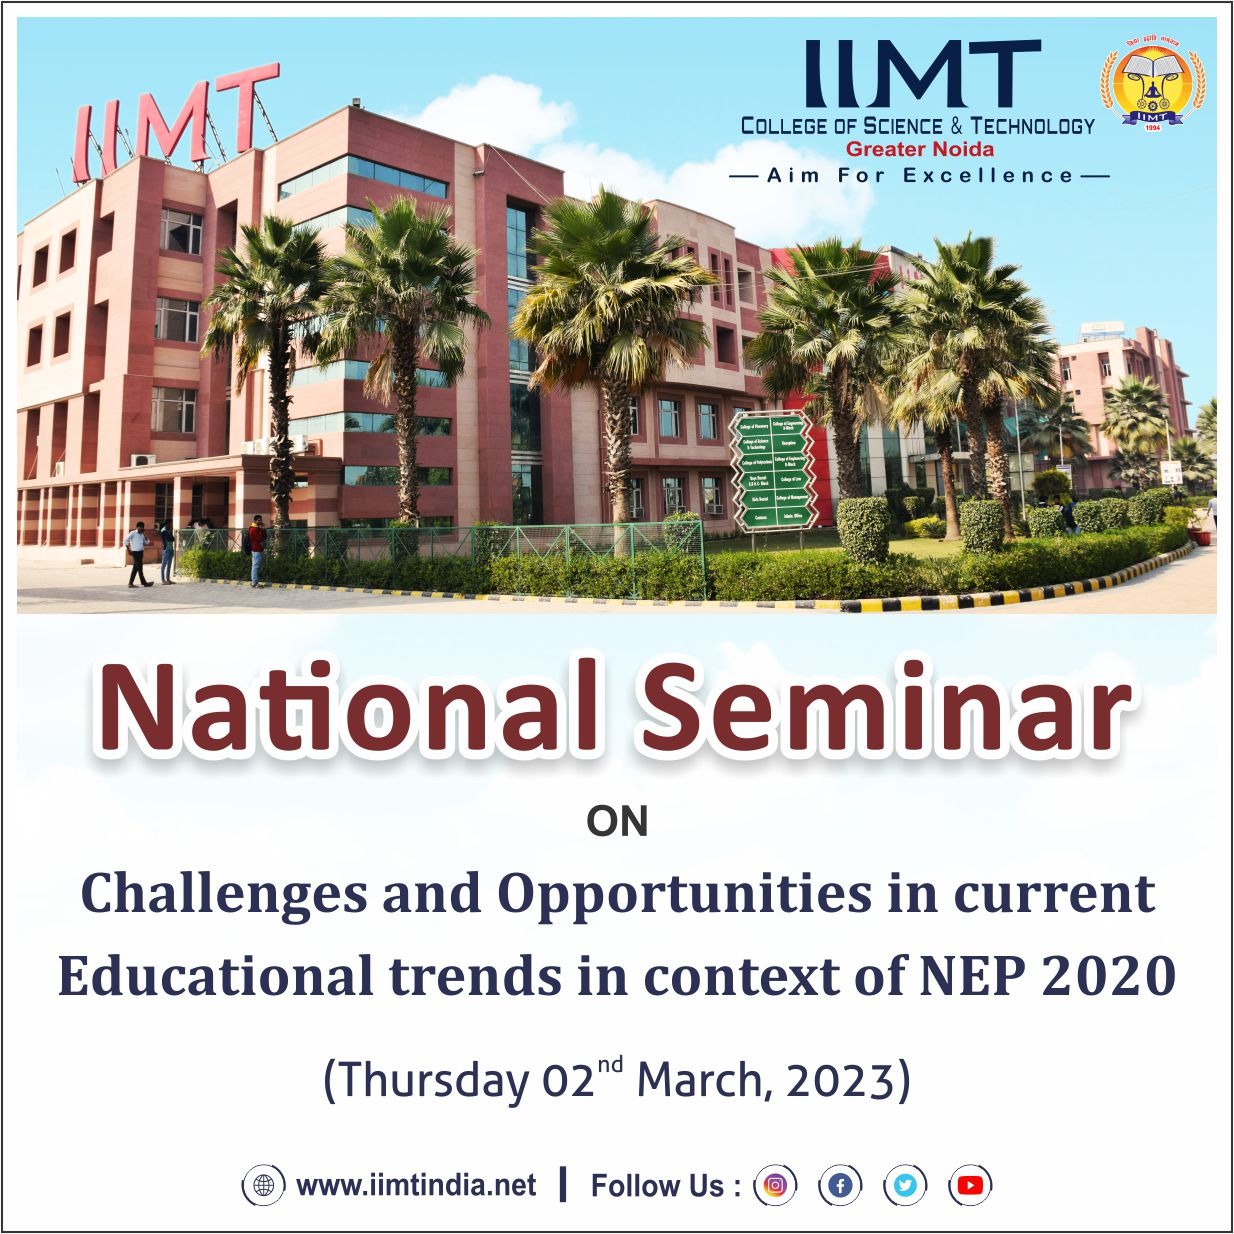 National Seminar on Challenges and Opportunities in Current Educational Trends in Context of NEP 202